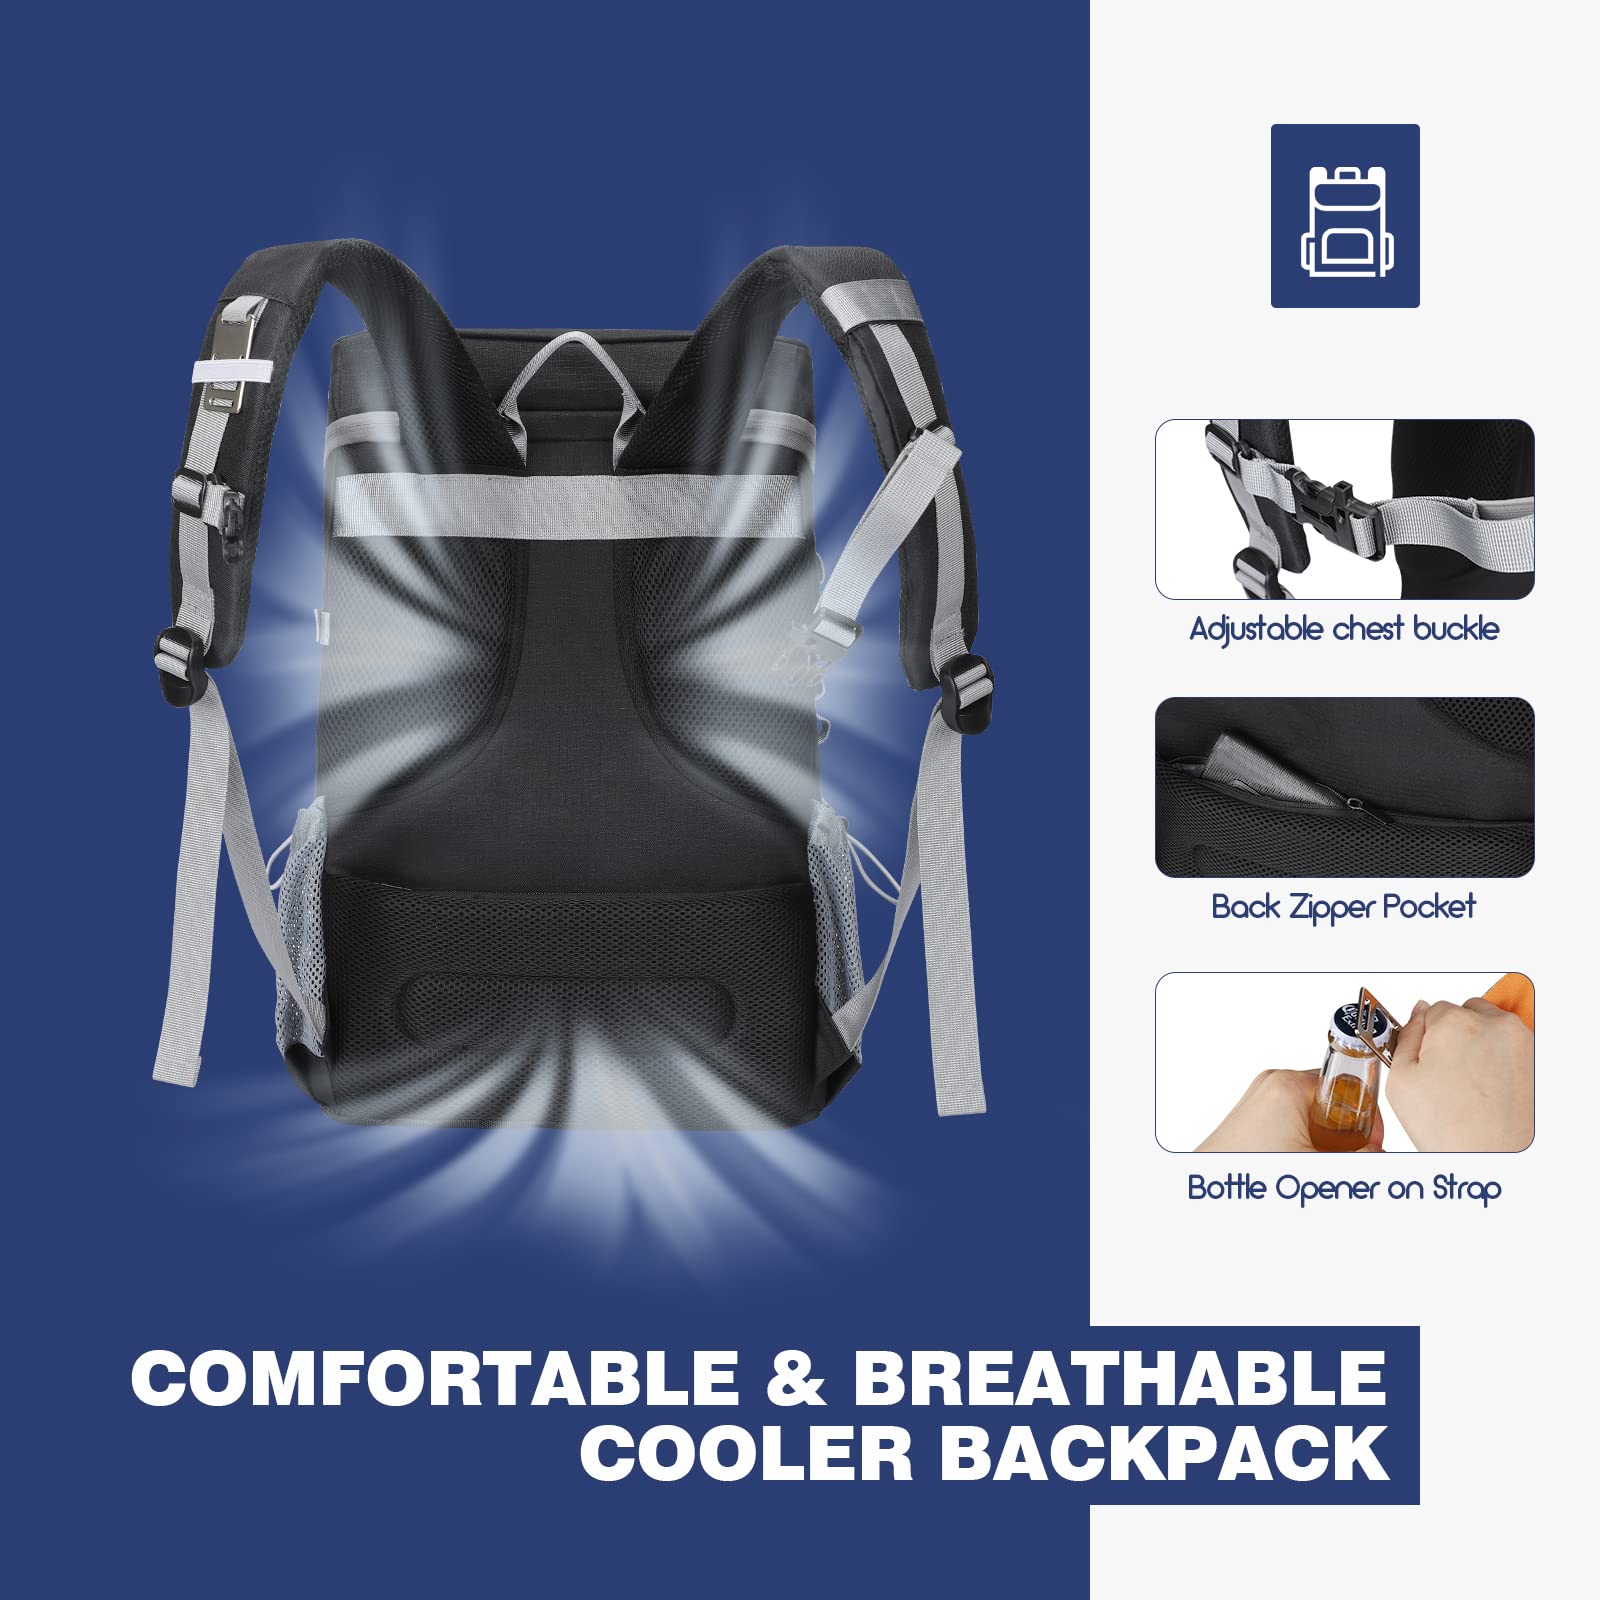 Maelstrom Cooler Backpack,35 Can Backpack Cooler Leakproof,Insulated Soft Cooler Bag,Camping Cooler,Beach Cooler,Ice Chest Backpack,Lightweight Travel Cooler Lunch Backpack for Hiking,Shopping